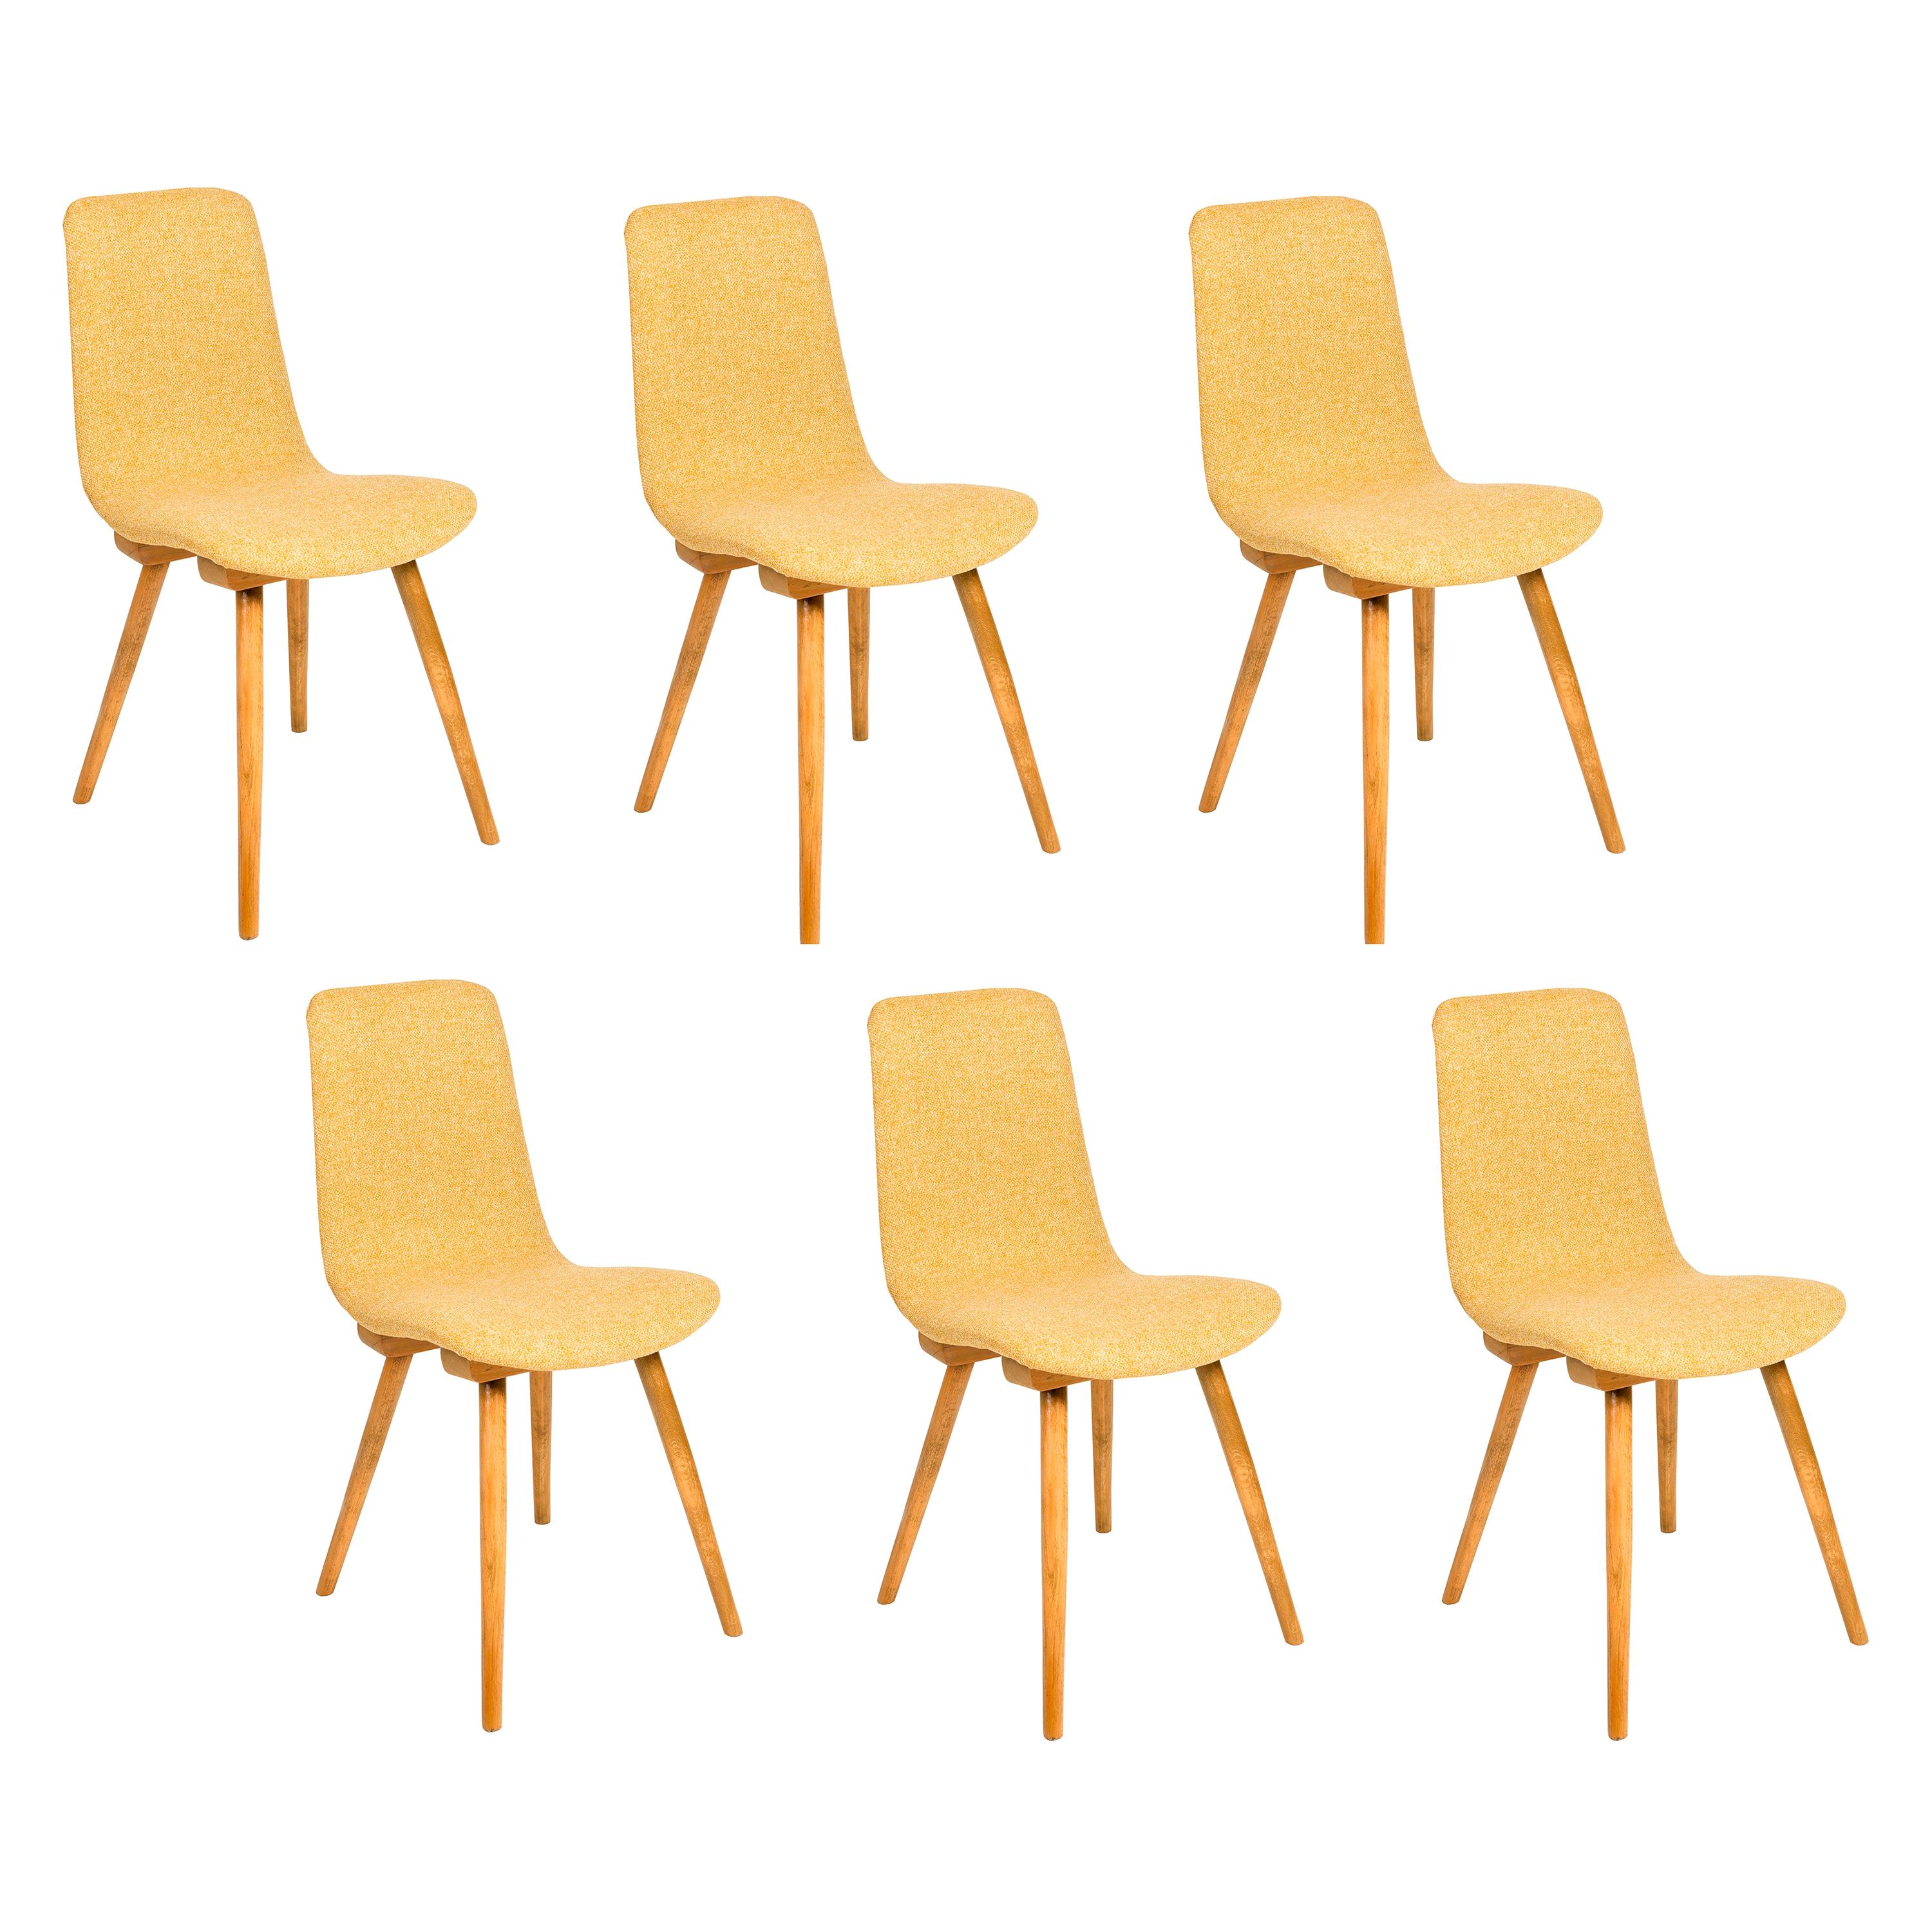 Set of Six 20th Century Fameg Yellow Vintage Chairs, 1960s, Poland For Sale